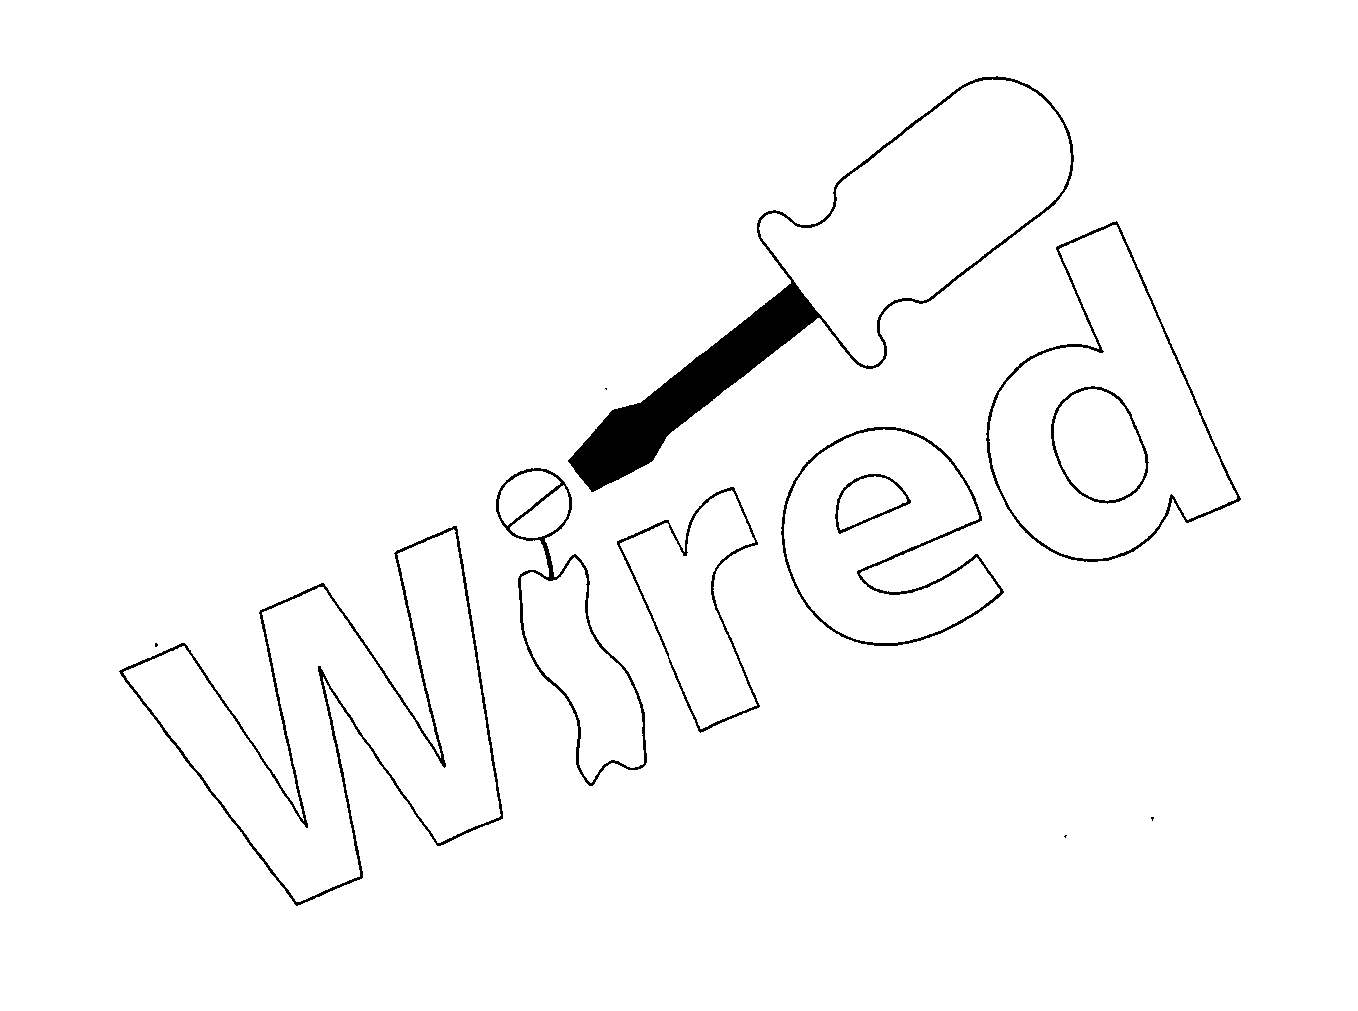  WIRED